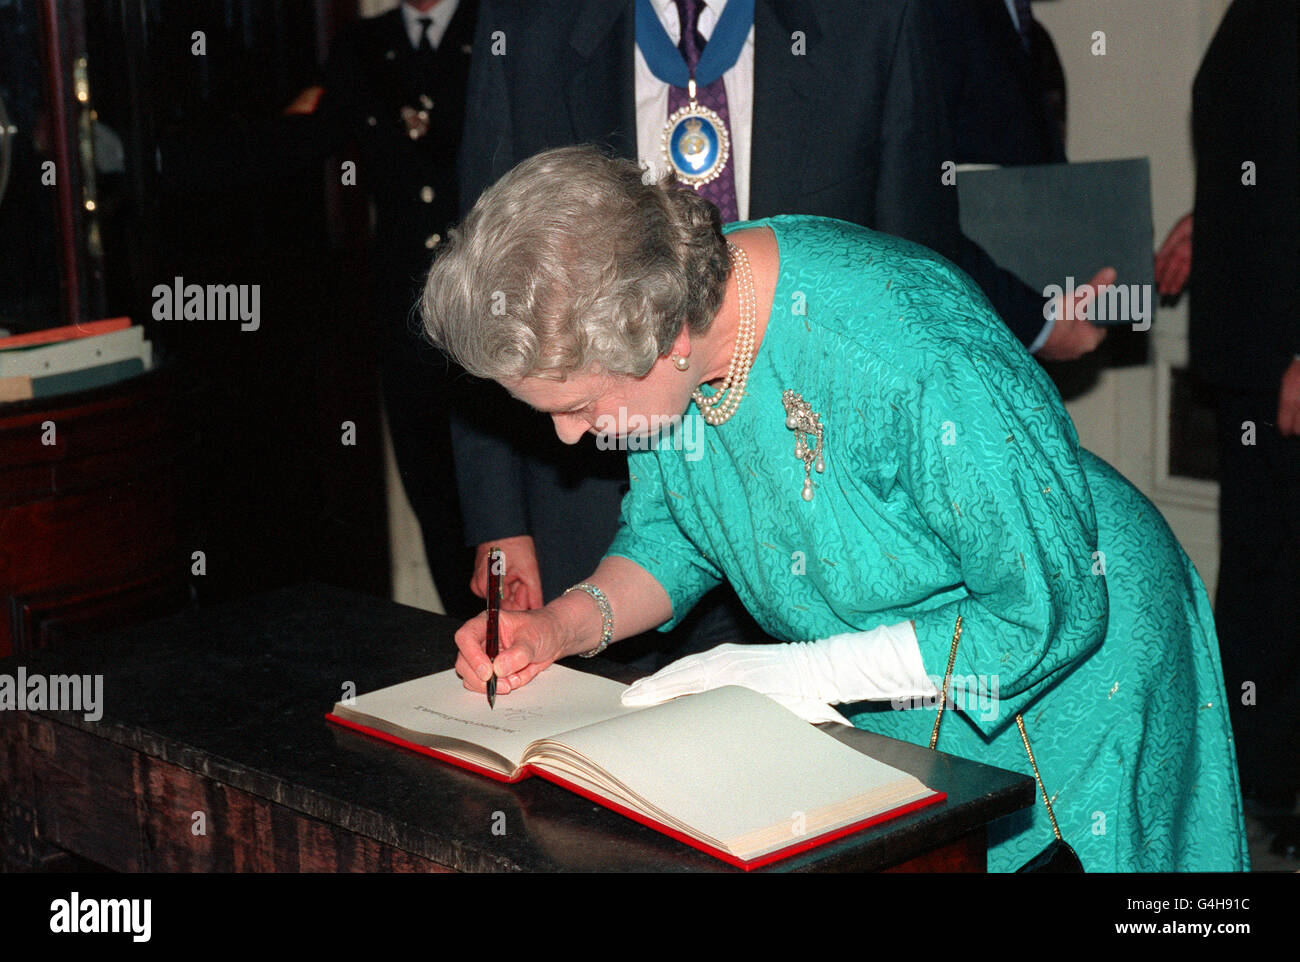 PA NEWS PHOTO 26/5/93 THE QUEEN SIGNS THE DISTINGUISHED VISITORS BOOK AT THE ROYAL GEOGRAPHICAL SOCIETY IN LONDON WHERE SHE WAS ATTENDING A RECEPTION TO COMMEMORATE THE FORTIETH ANNIVERSARY OF THE CONQUEST OF EVEREST EXPEDITION Stock Photo